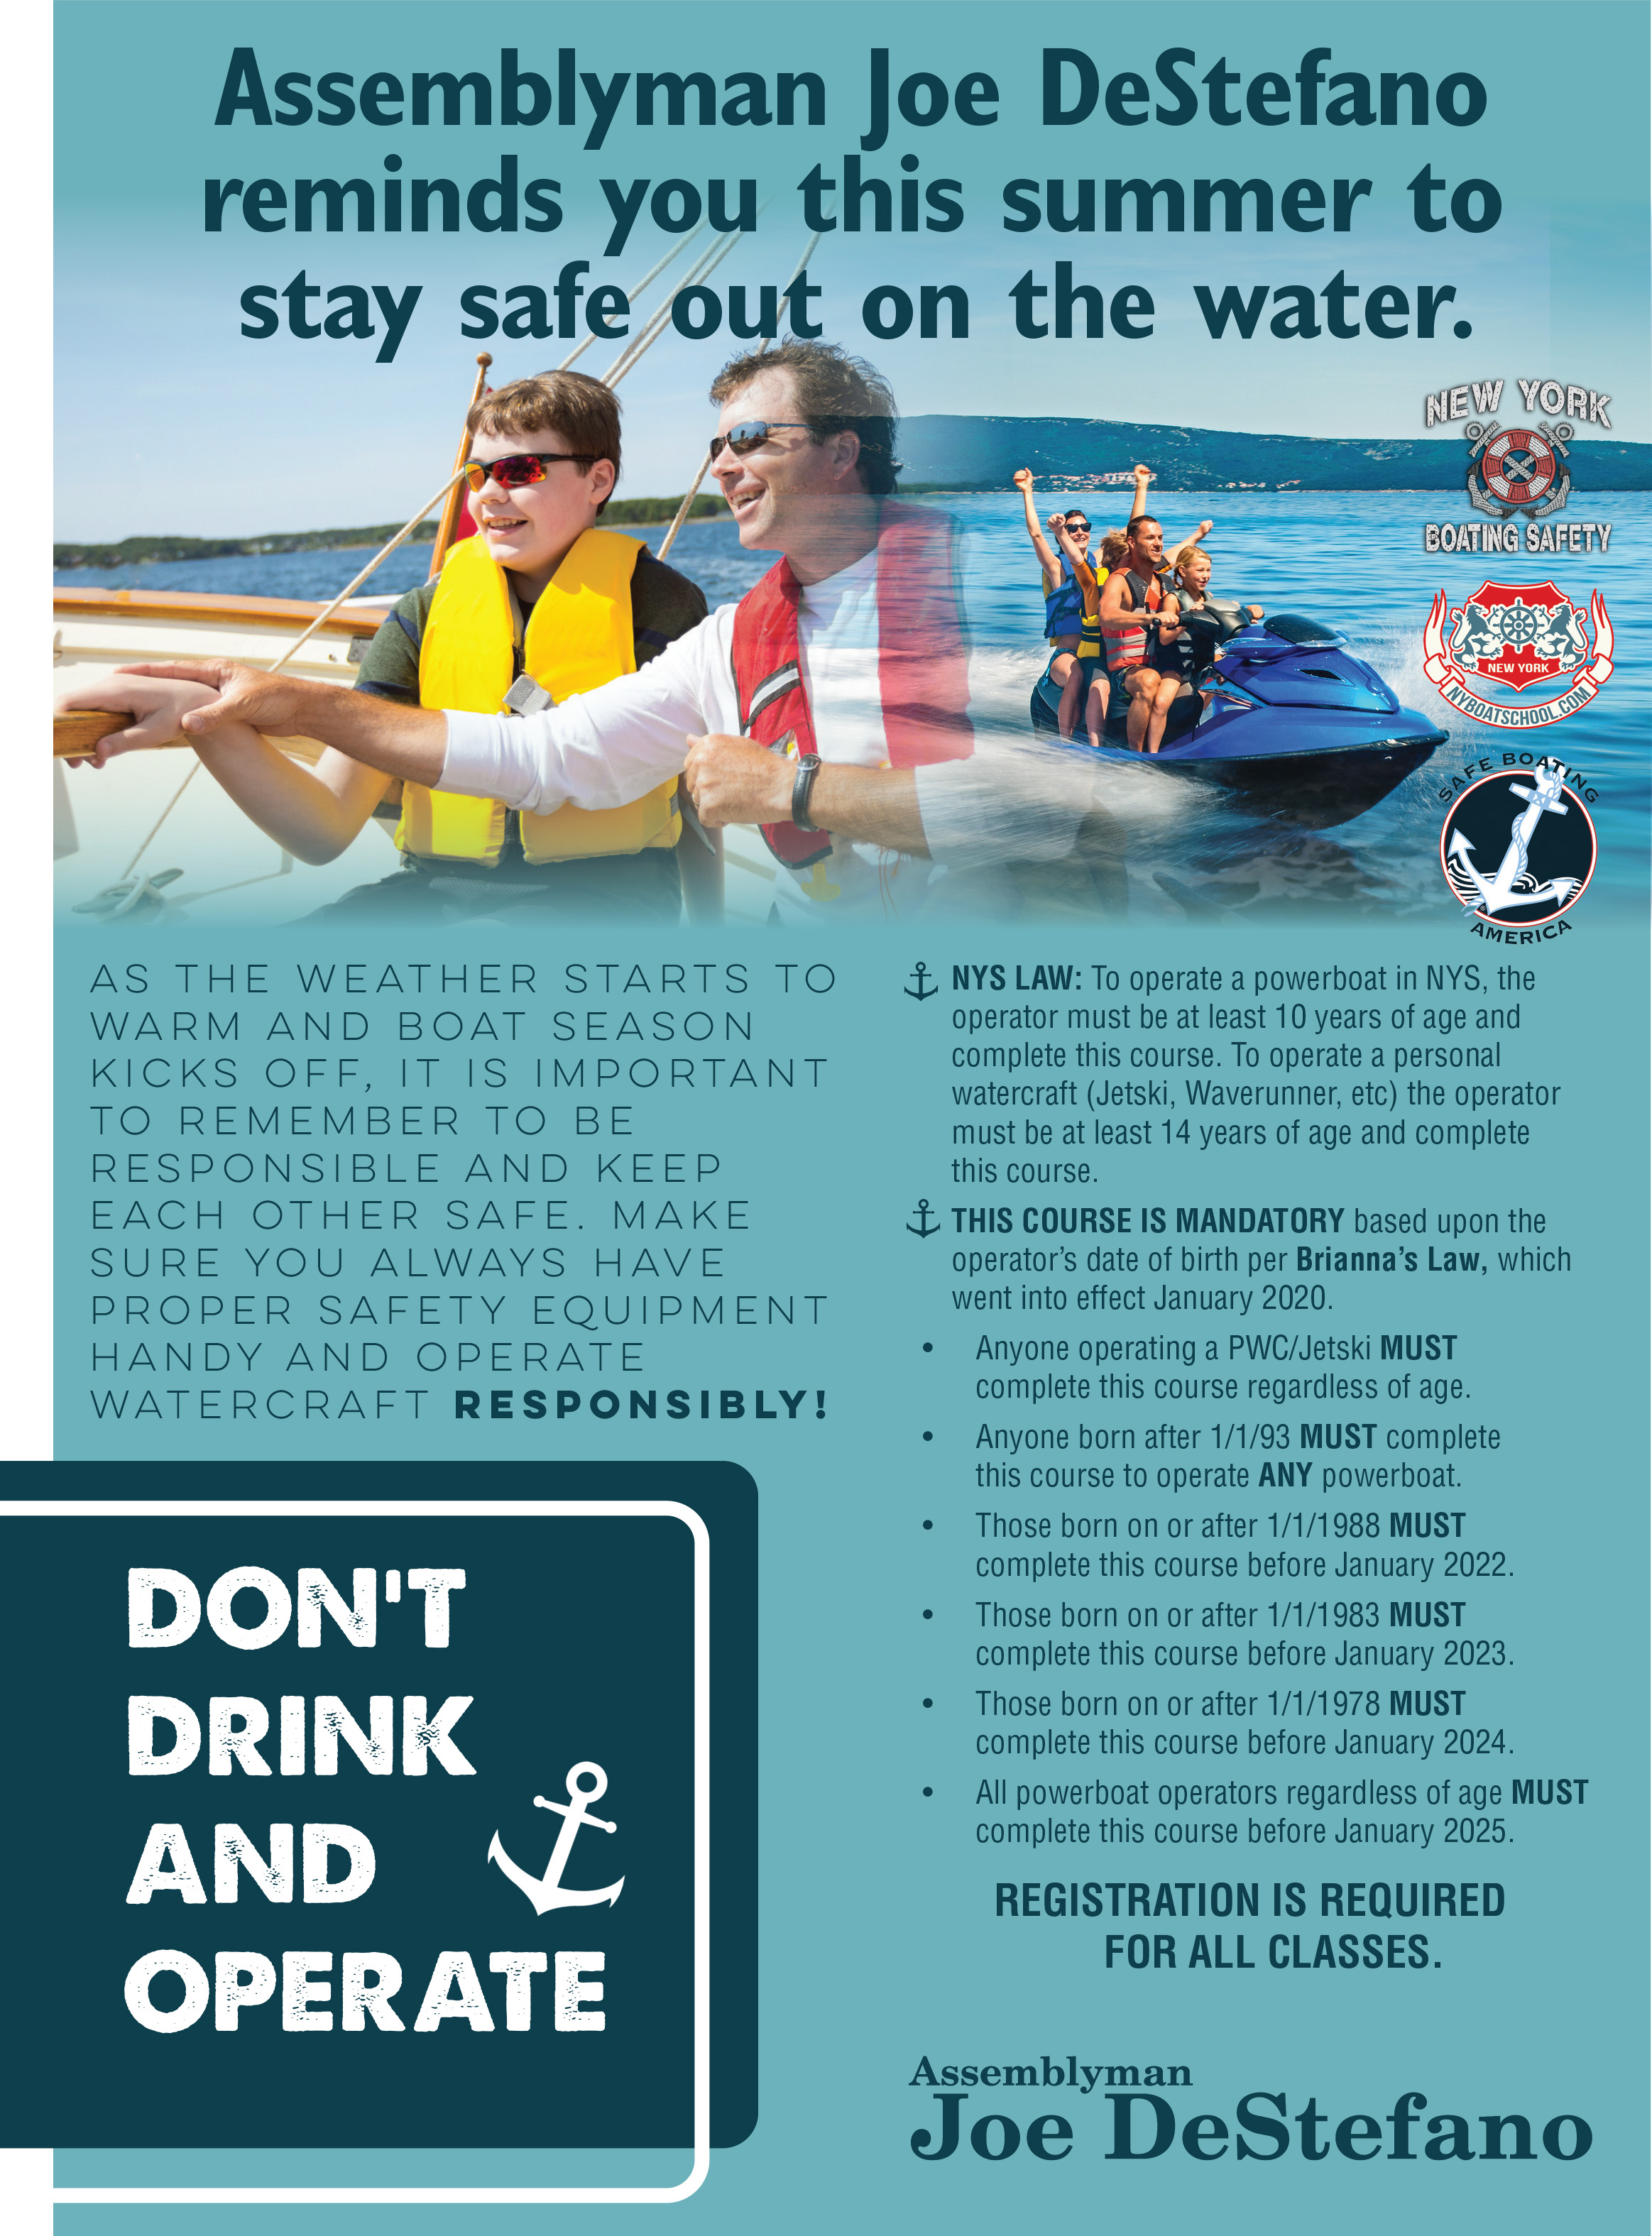 Get Your Mandatory Boating Safety Certification Today